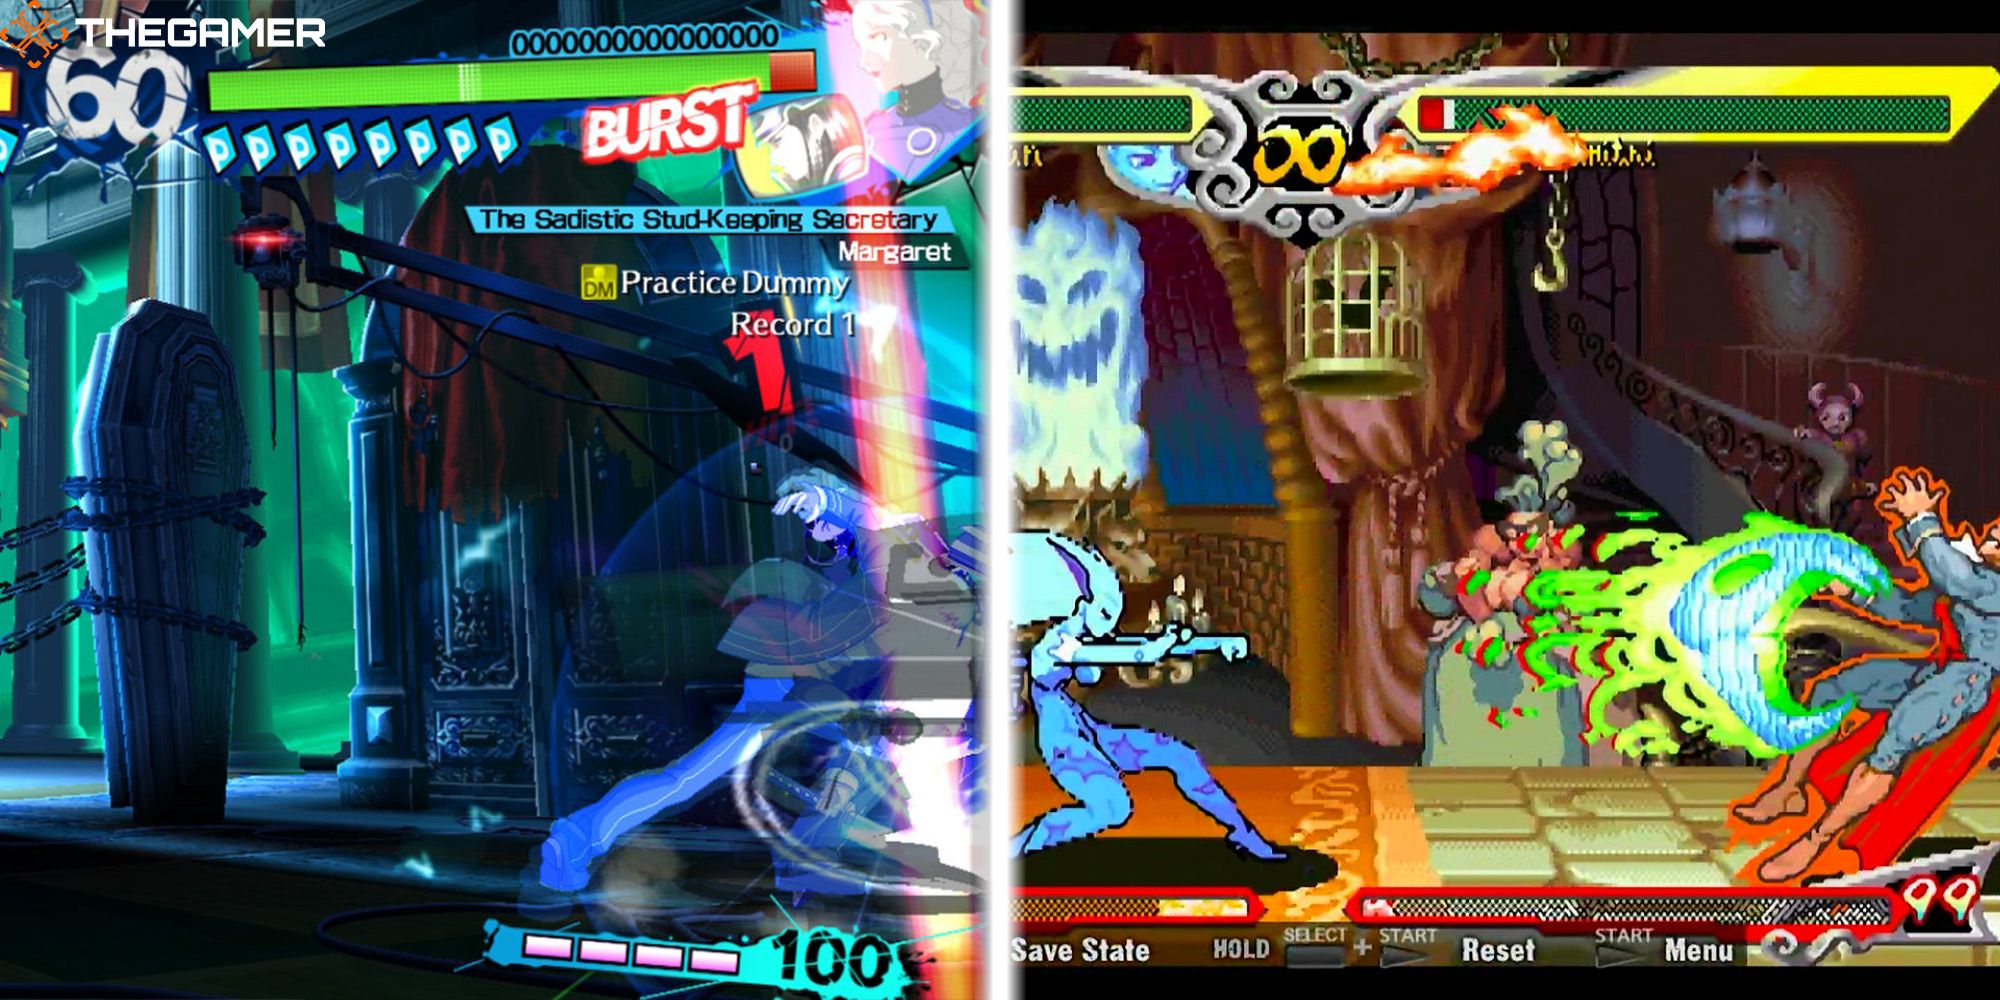 [Left Panel] Yu hits Margaret with an skill boosted Heroic Bravery attack. Persona 4 Arena Ultimax. [Right Panel] Morrigan hits Demitri with an EX Soul Fist attack. Darkstalkers Resurrection.